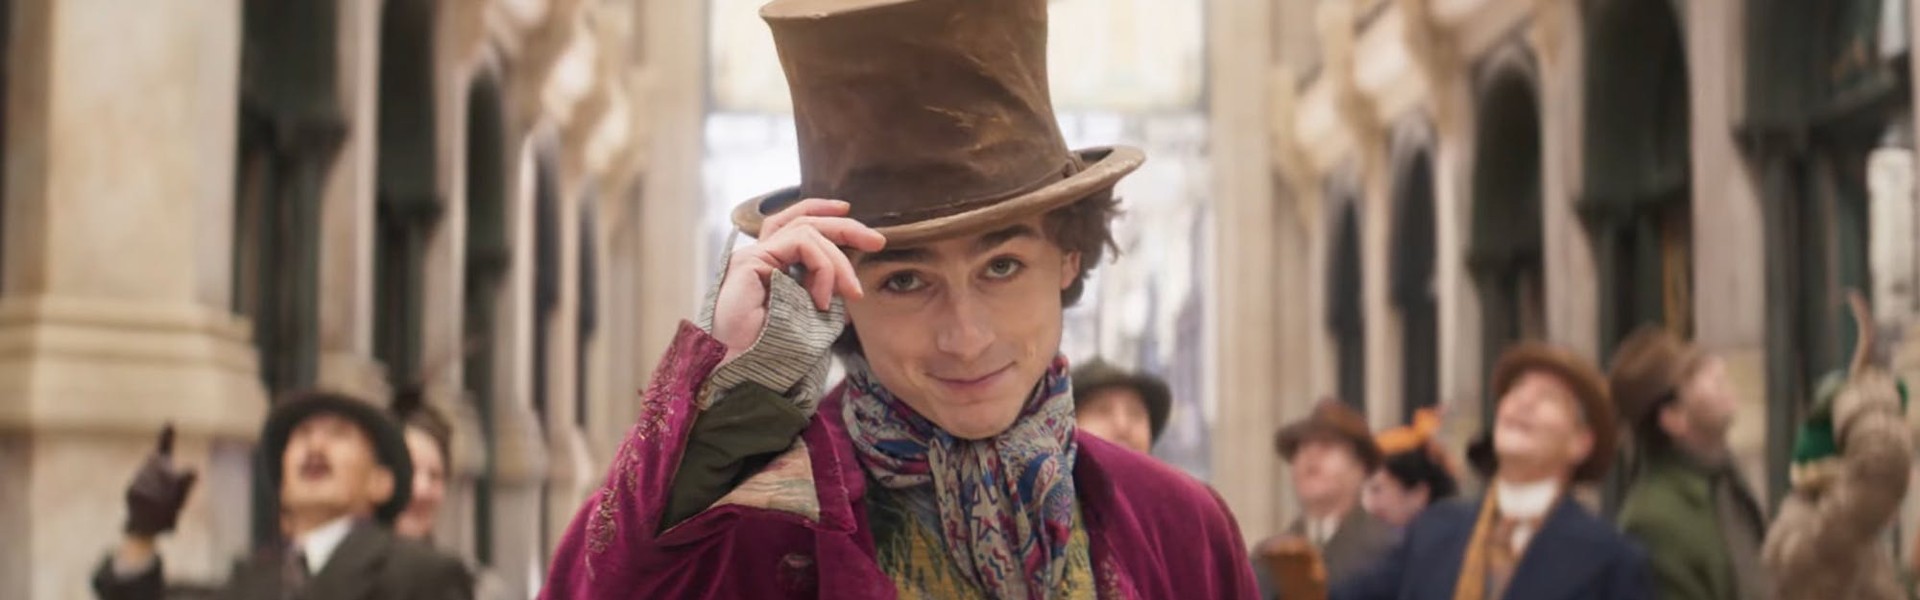 Worldwide Box Office: Chocolate Served! “Wonka” Conquers the World